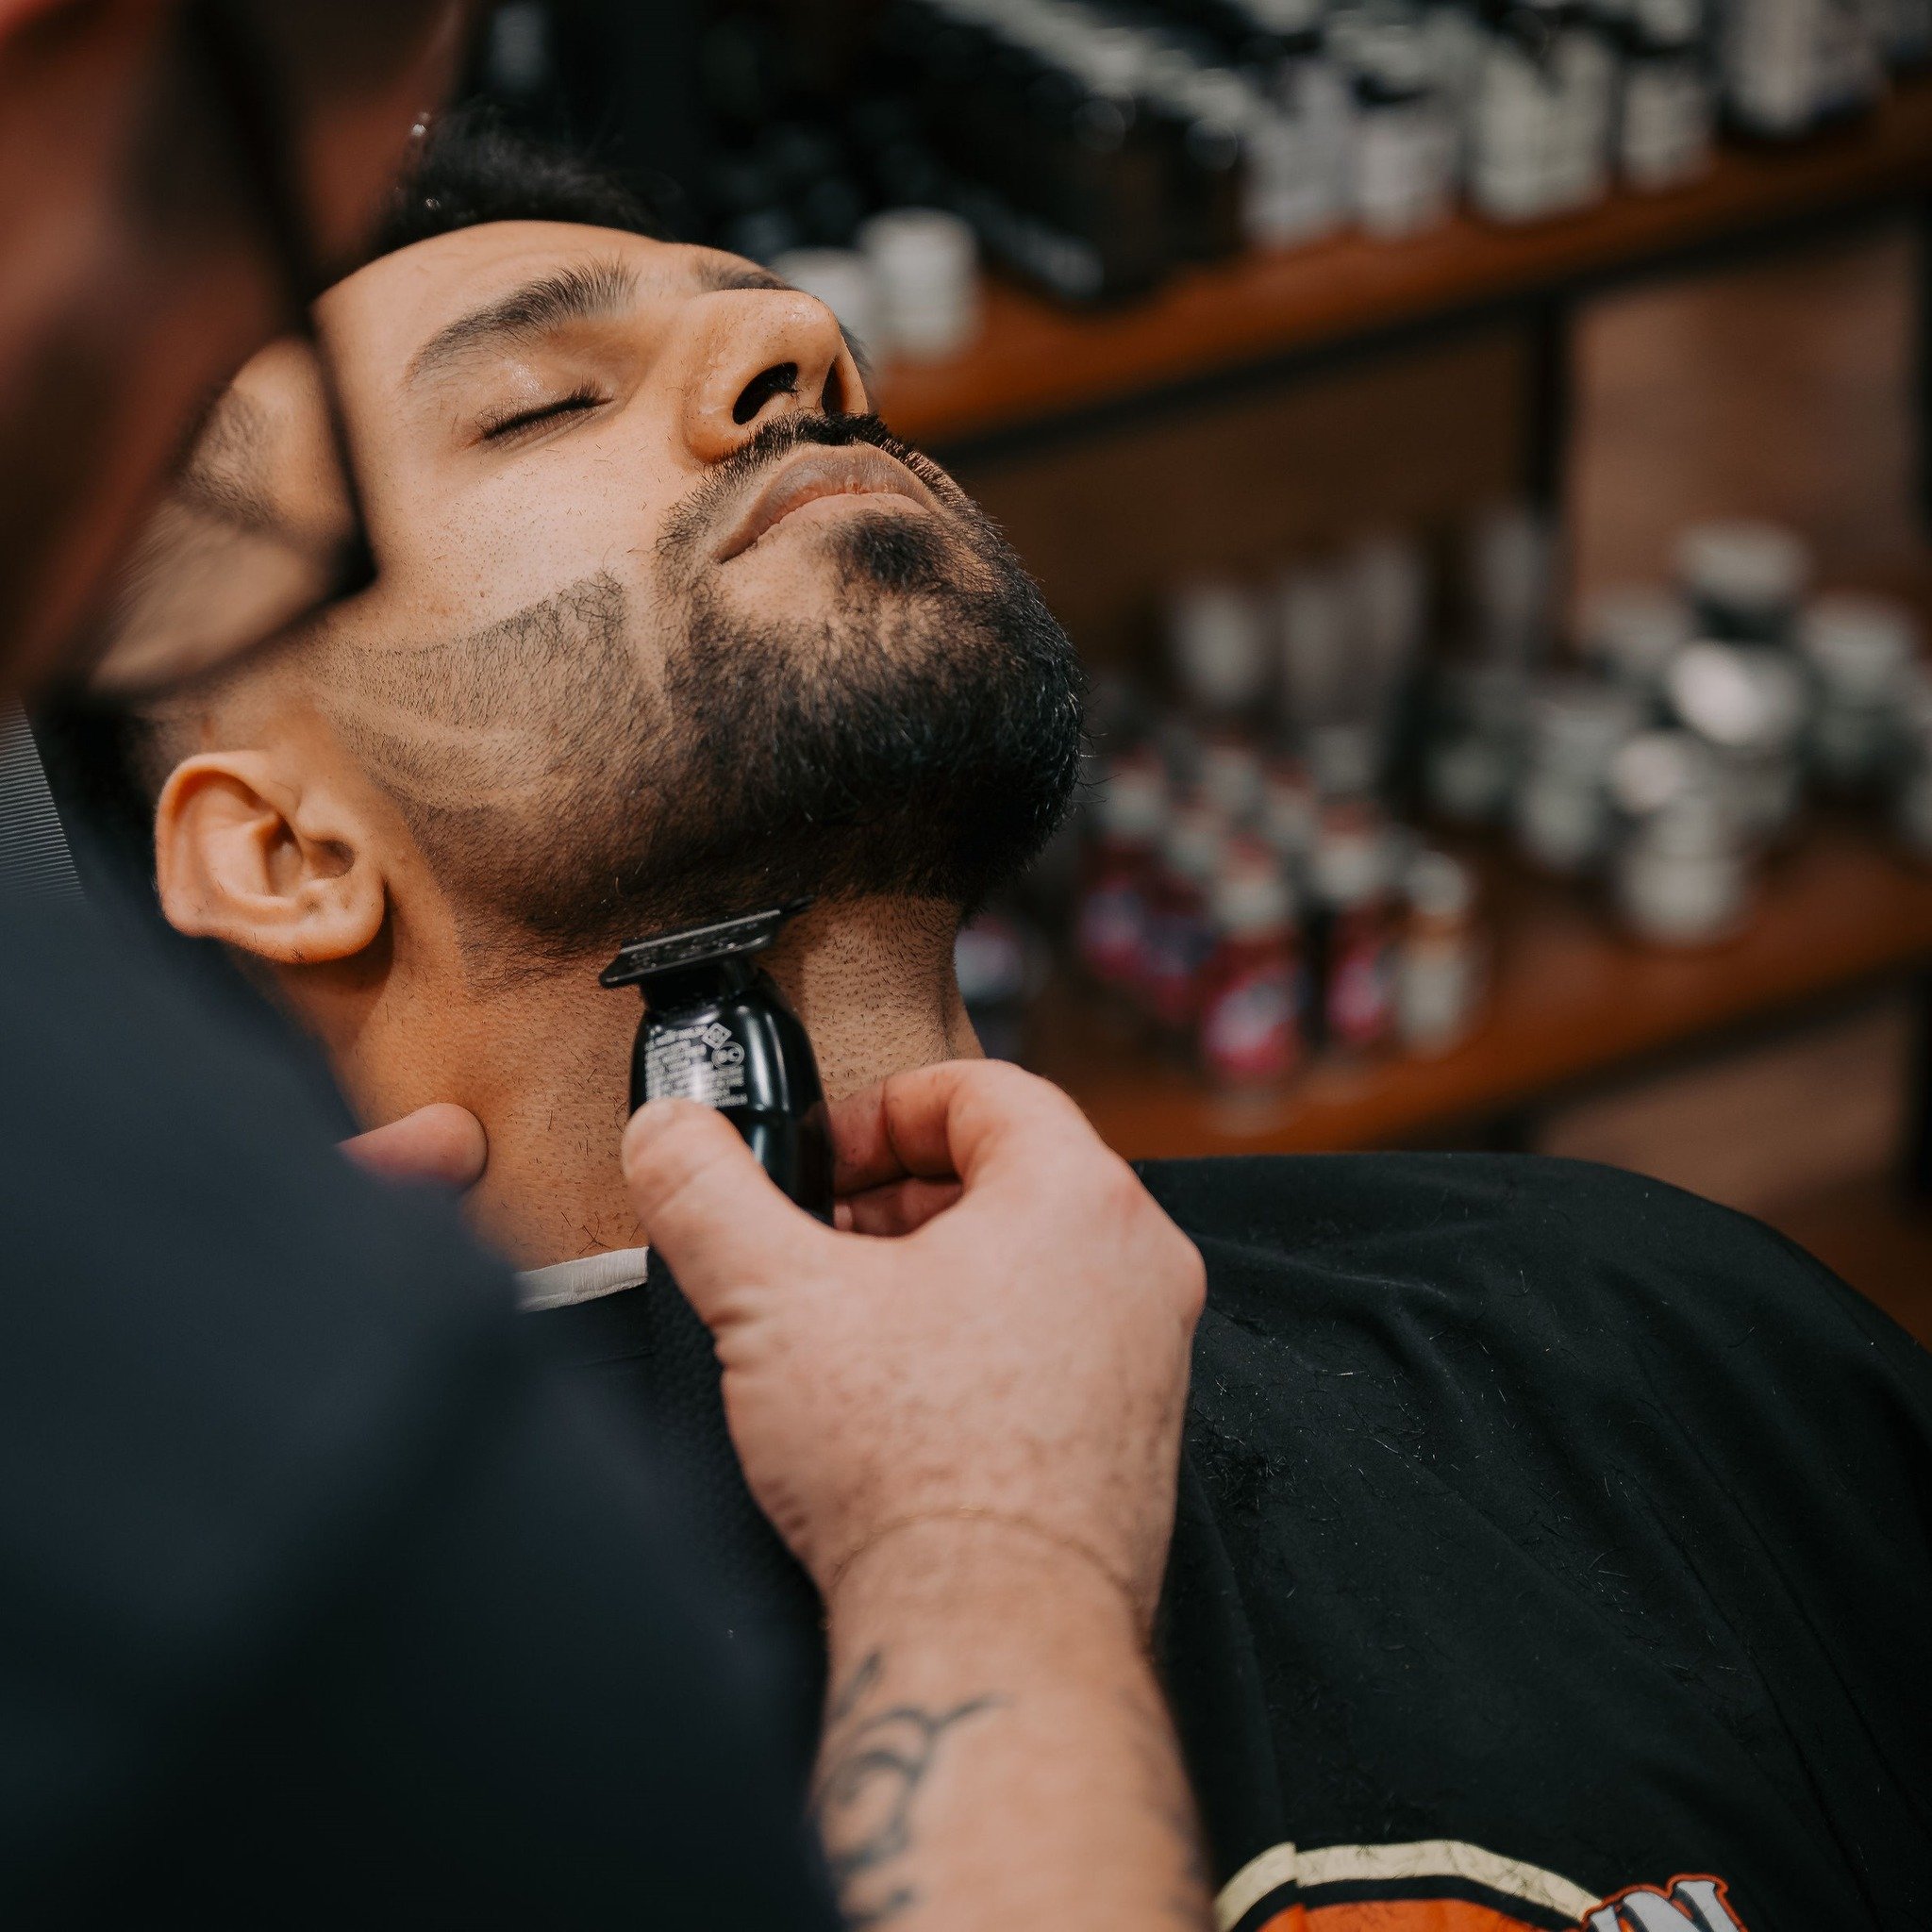 If your beard pursuits have left you scratching your chin (literally and figuratively), come and chat with one of our barbers. 🧔🏽&zwj;

HMB Barbers are experts on men&rsquo;s grooming and style, so we know from experience which beards look best on 